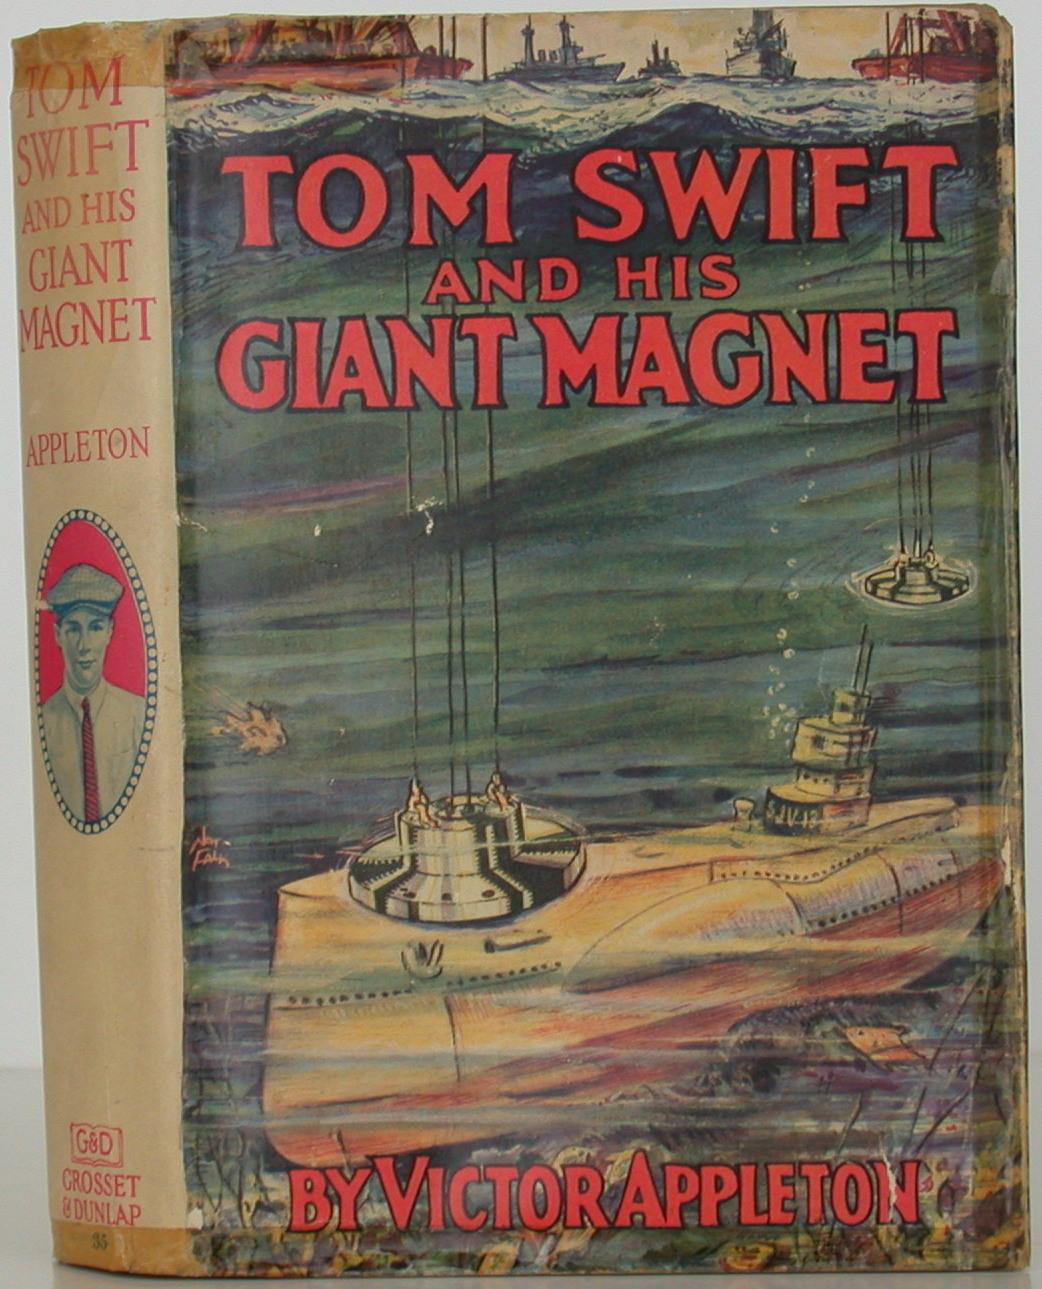 Tom Swift and his Giant Magnet, Victor Appleton